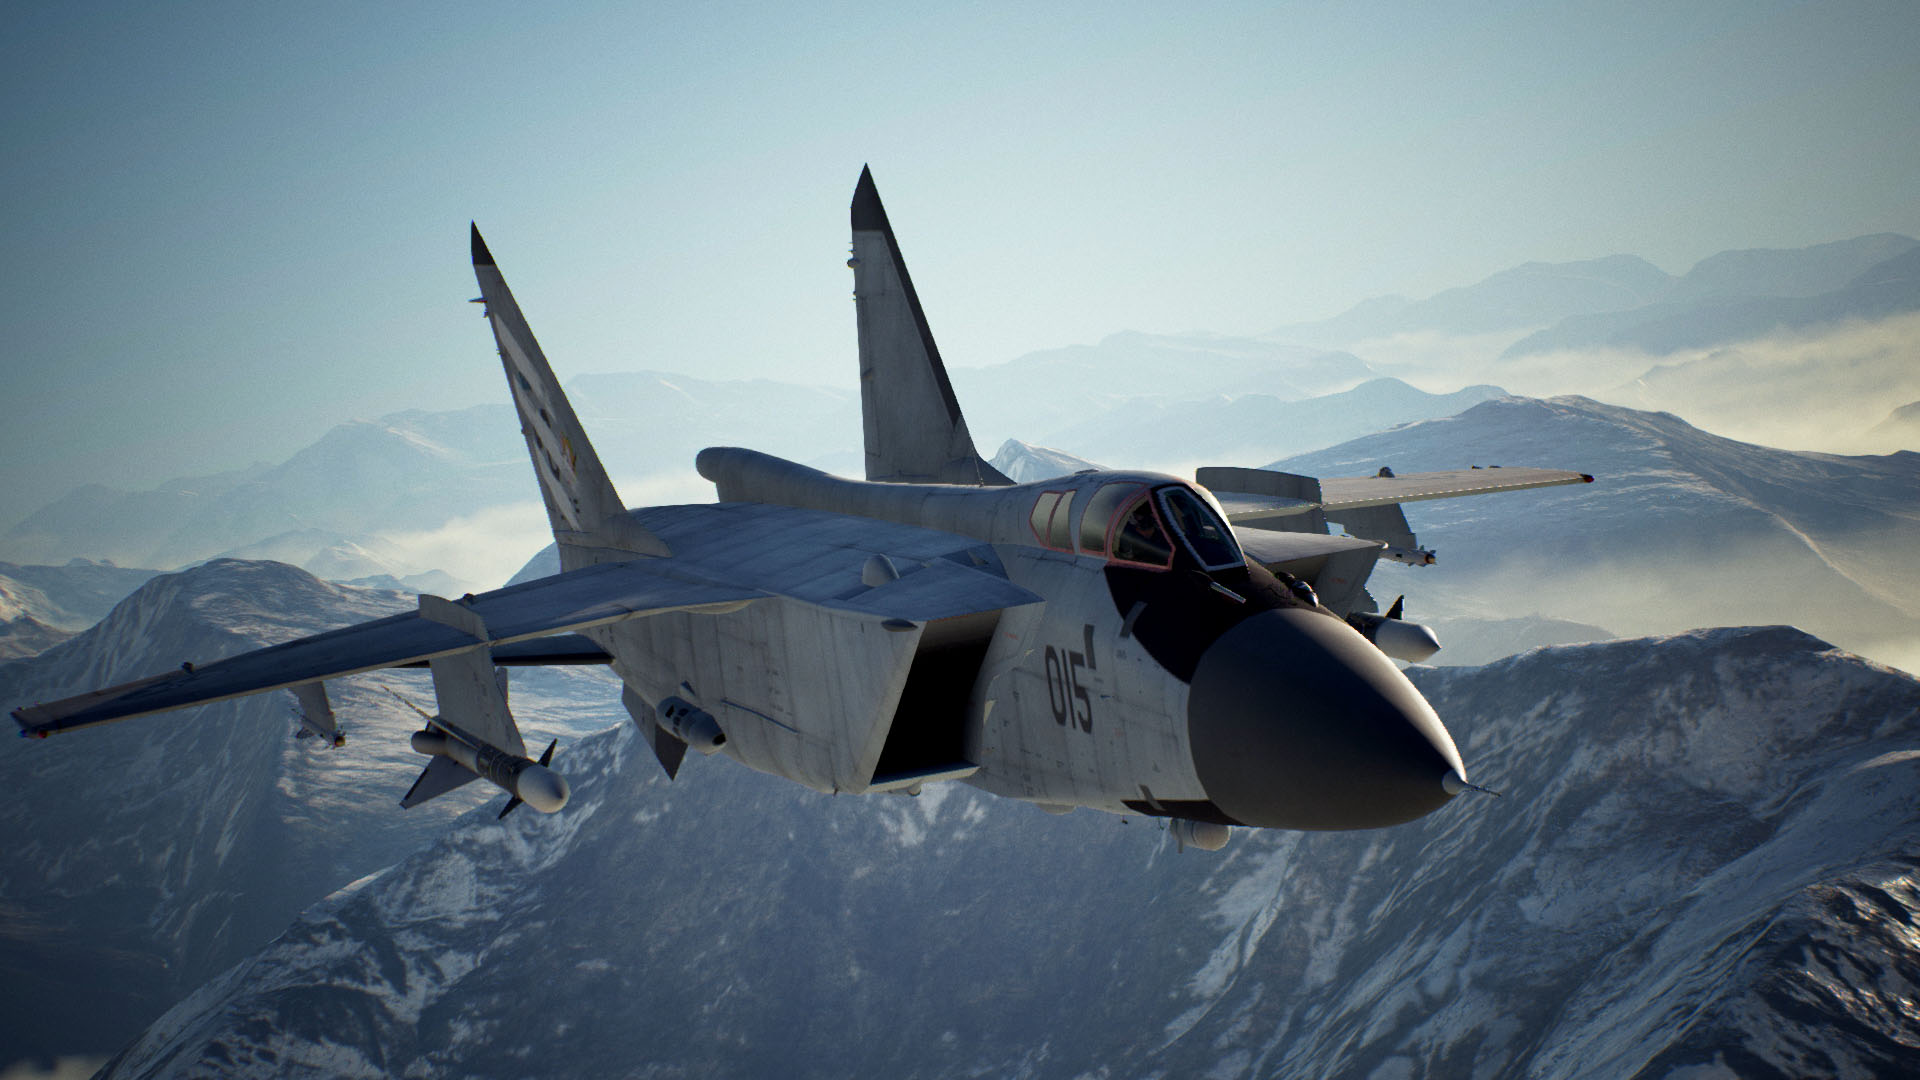 Ace Combat 7 Skies Unknown 2nd Anniversary Update Out Tomorrow